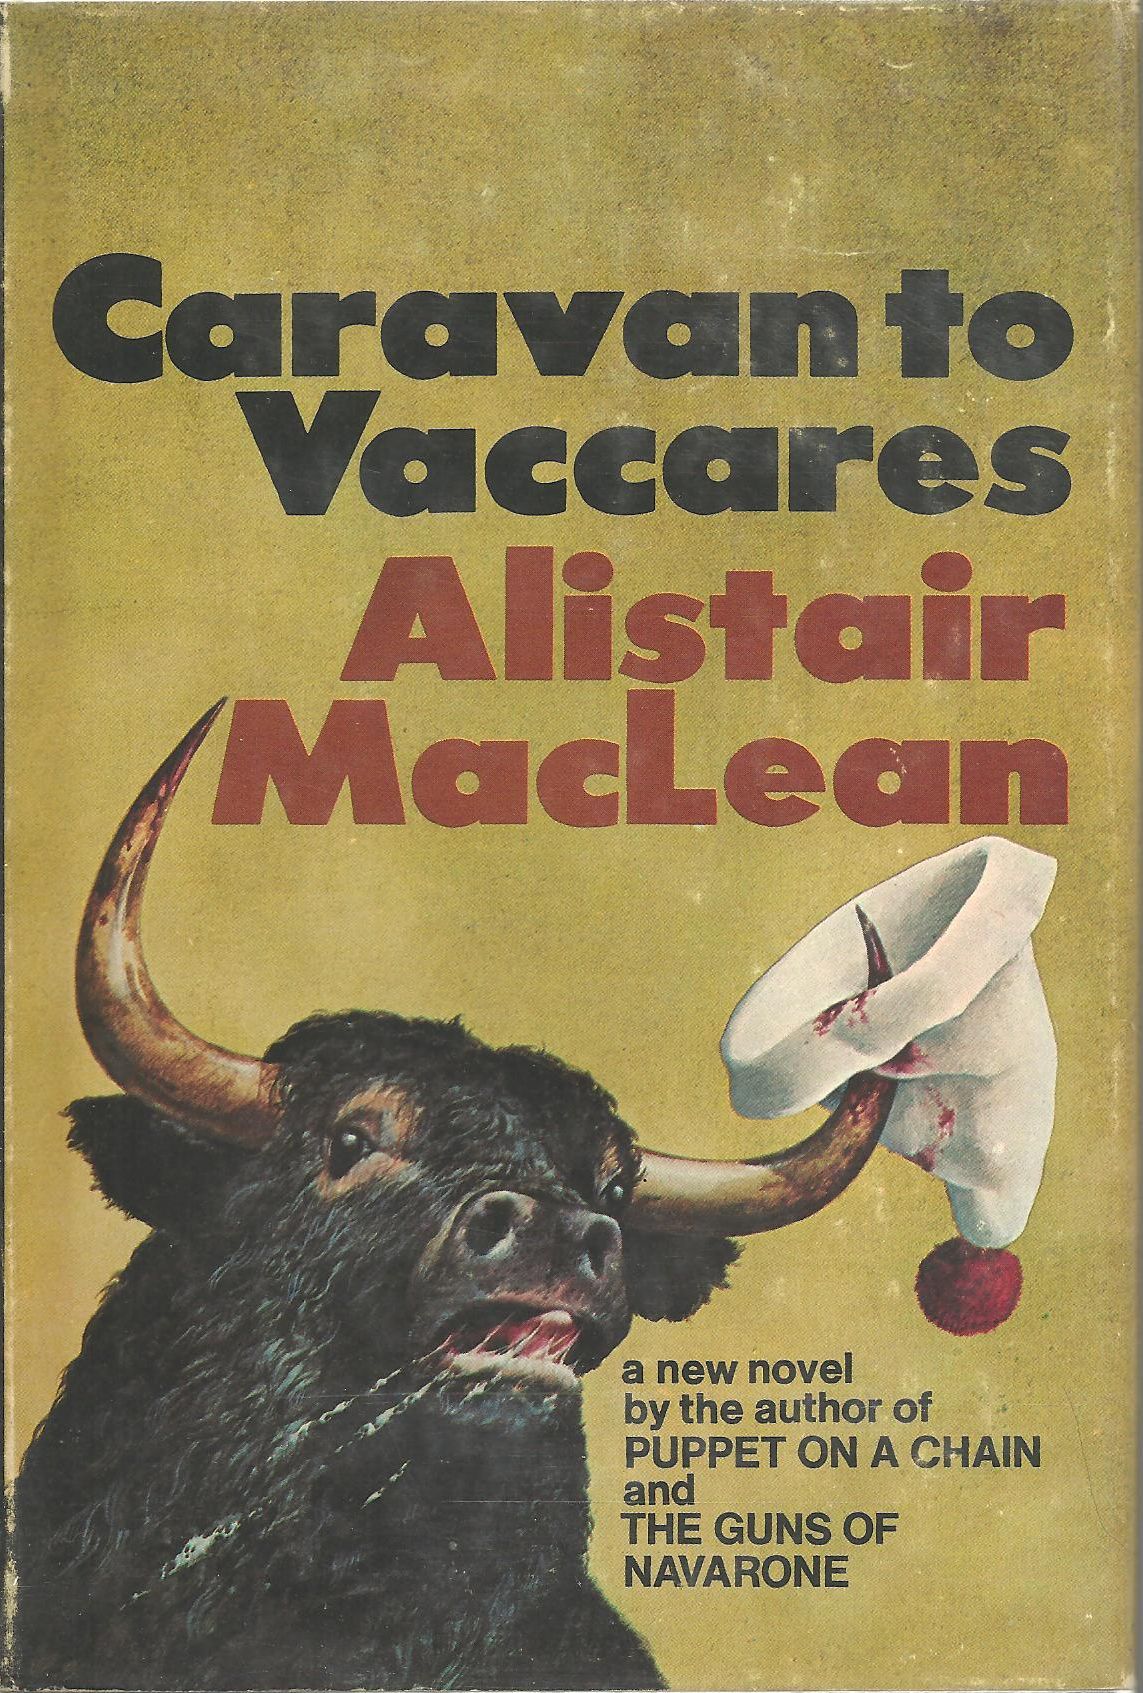 Caravan to Vaccares - US first edition